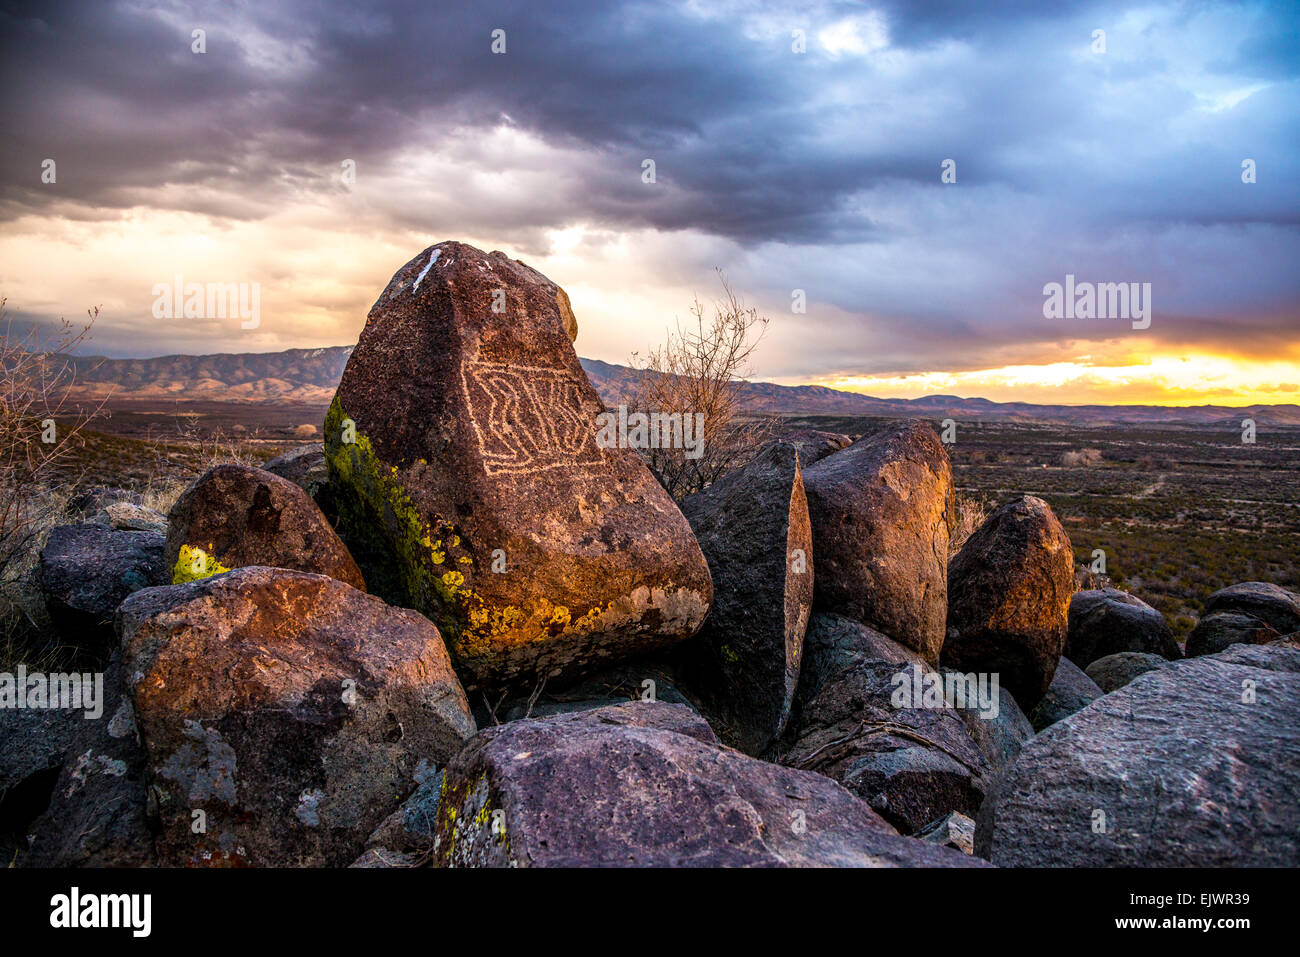 Three Rivers Petroglyph Site, near Carrizozo, New Mexico contains 21,000 petroglyphs carved into rock and a prehistoric village. Stock Photo